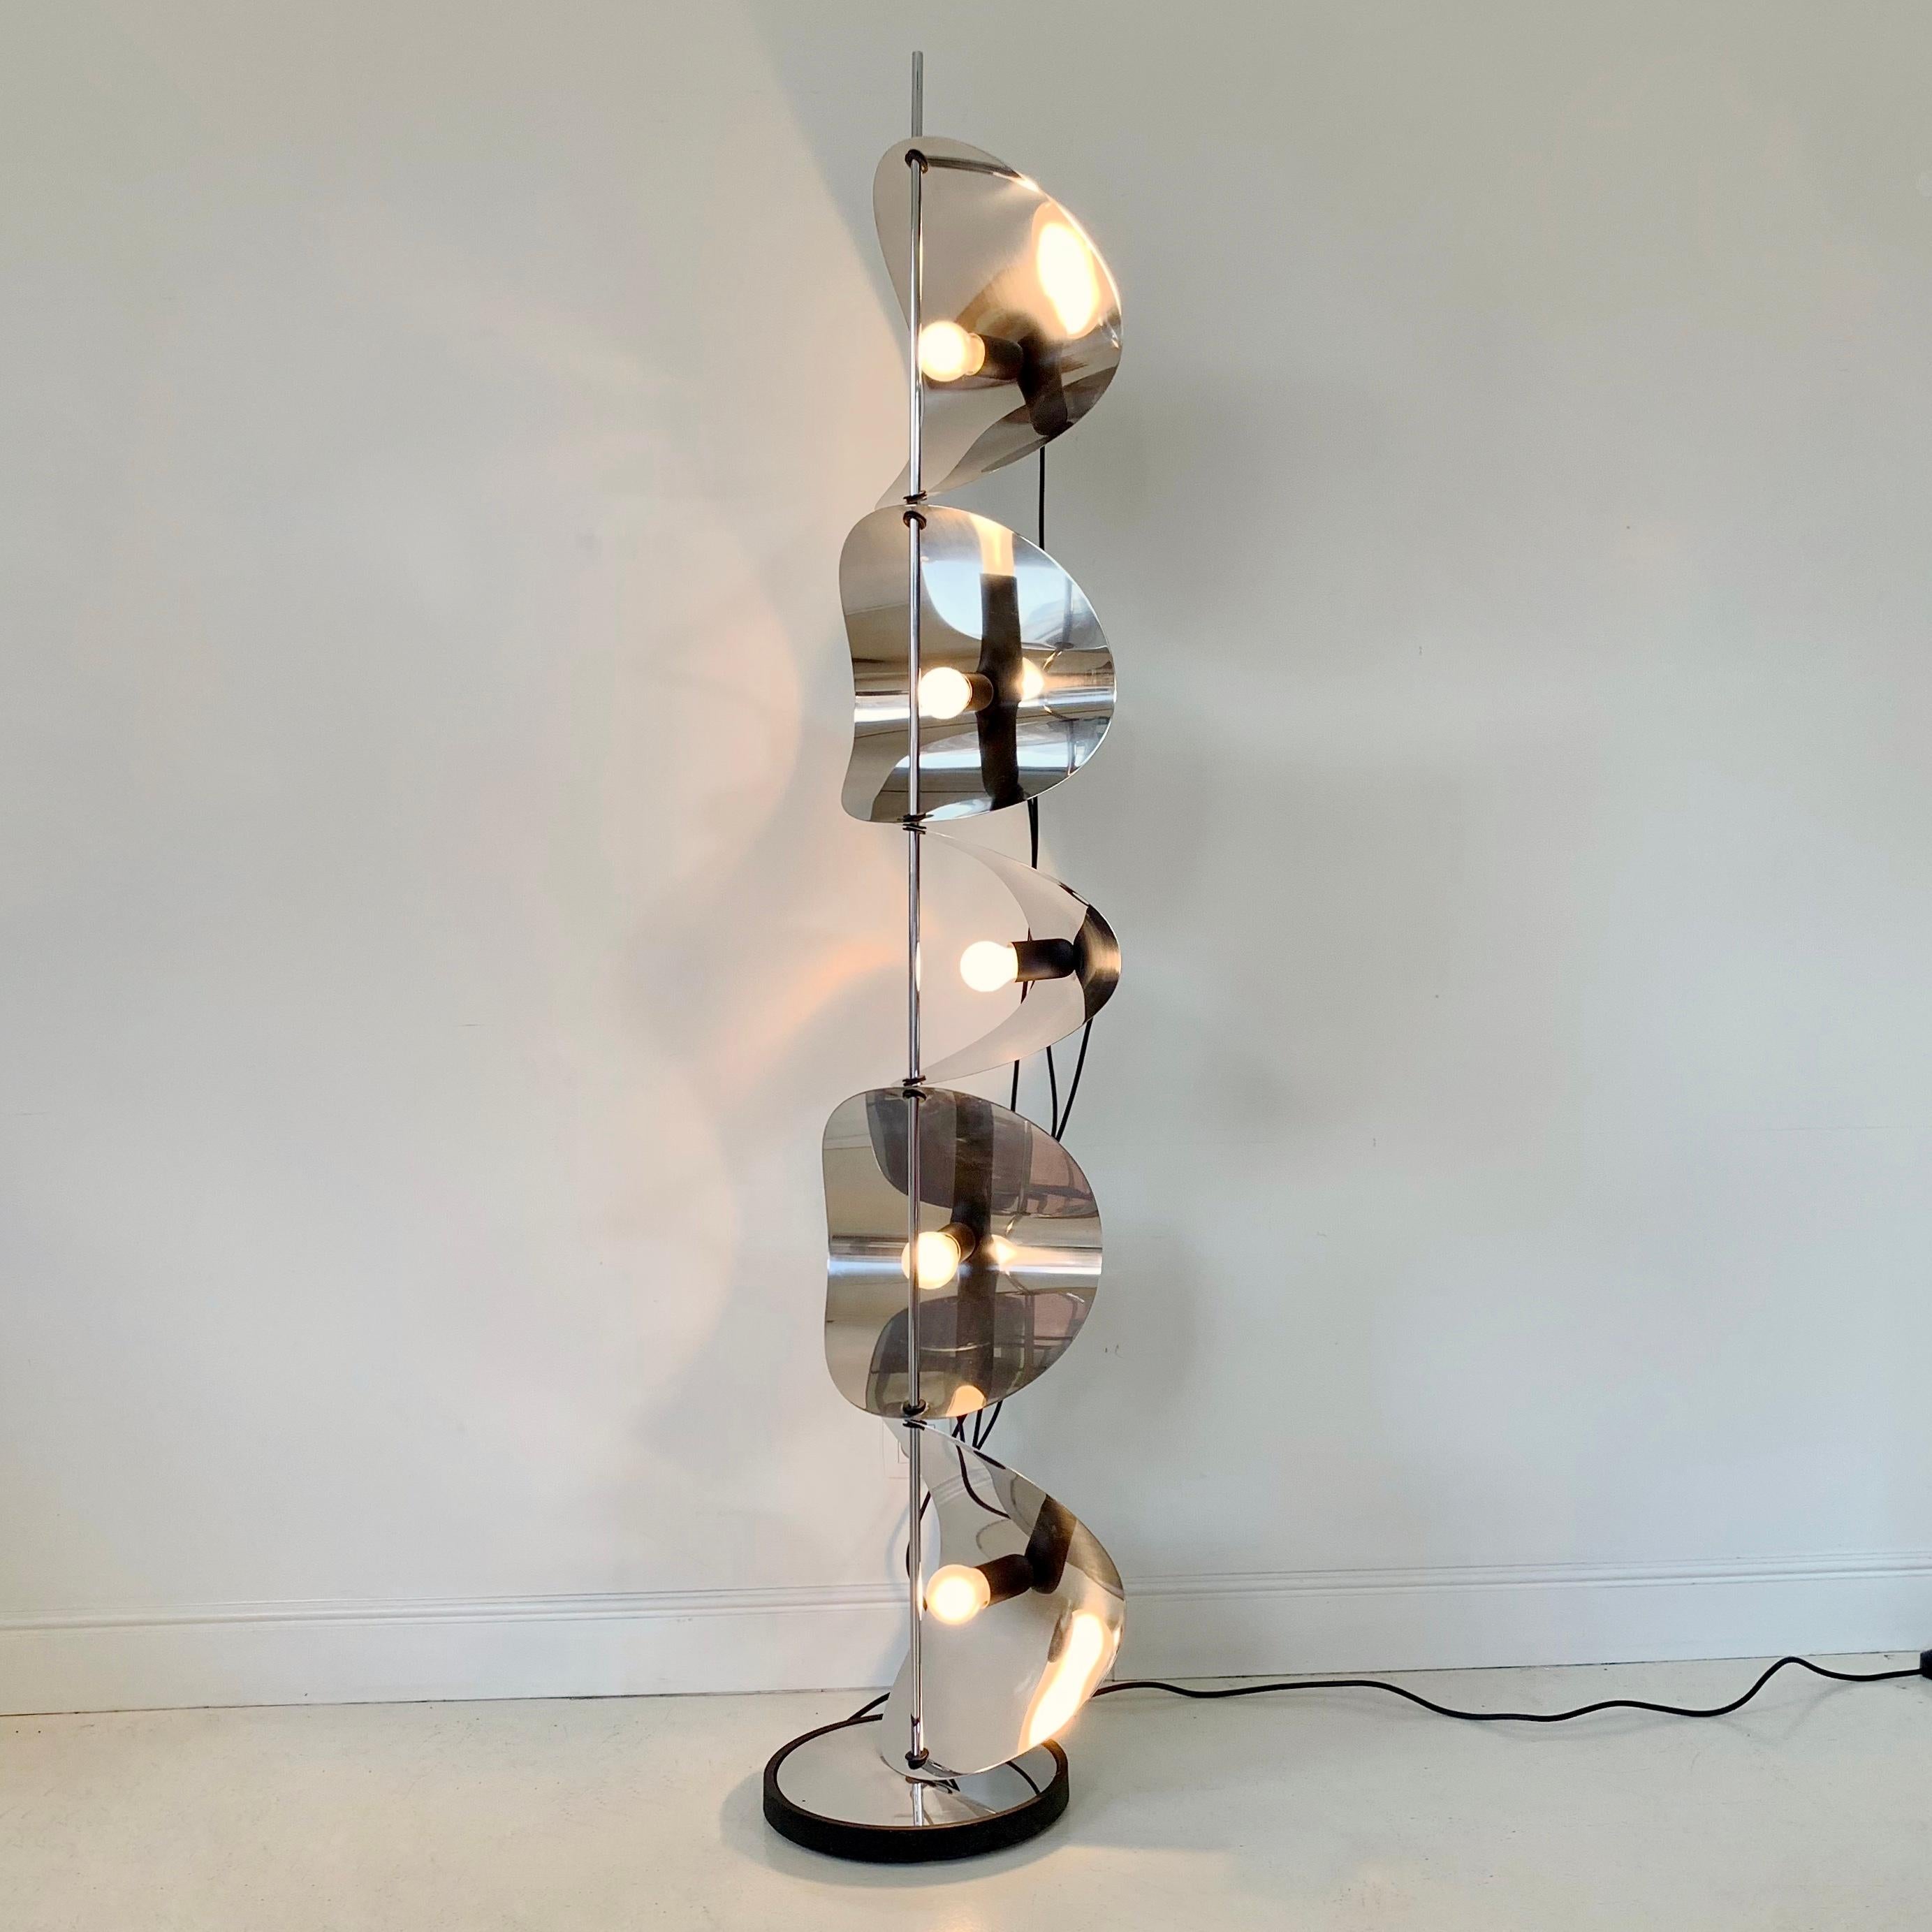 Sculpural Elica floor lamp by Cesare Leonardi & Franca Stagi for Lumenform, circa 1969, Italy. 
5 adjustable chrome plated sheets with 5 bulbs, heavy round steel base.
Dimensions: 186 cm H, diameter: 34 cm.
Nice lamp in good original condition.
All